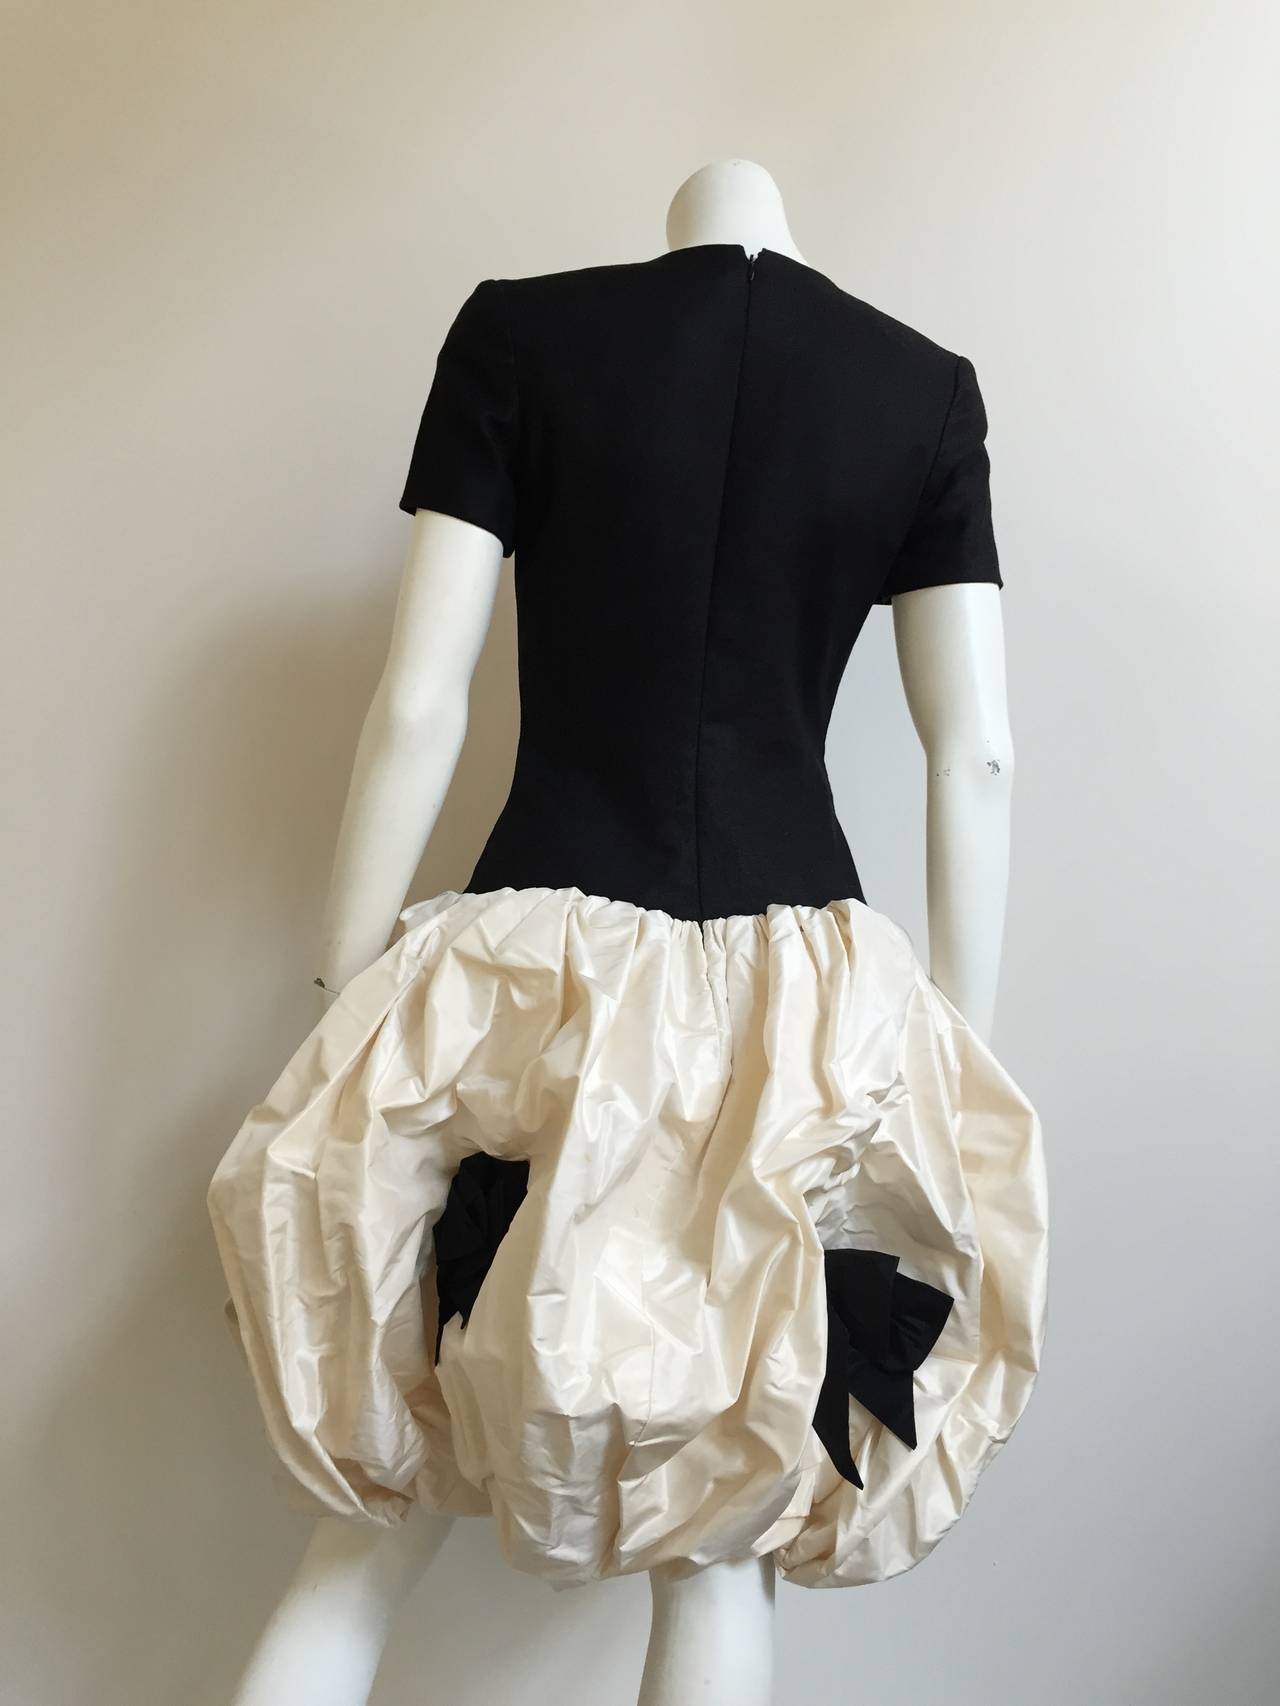 Bill Blass for Neiman Marcus 1980s Evening Cocktail Pouf Dress Size 4/6. For Sale 2